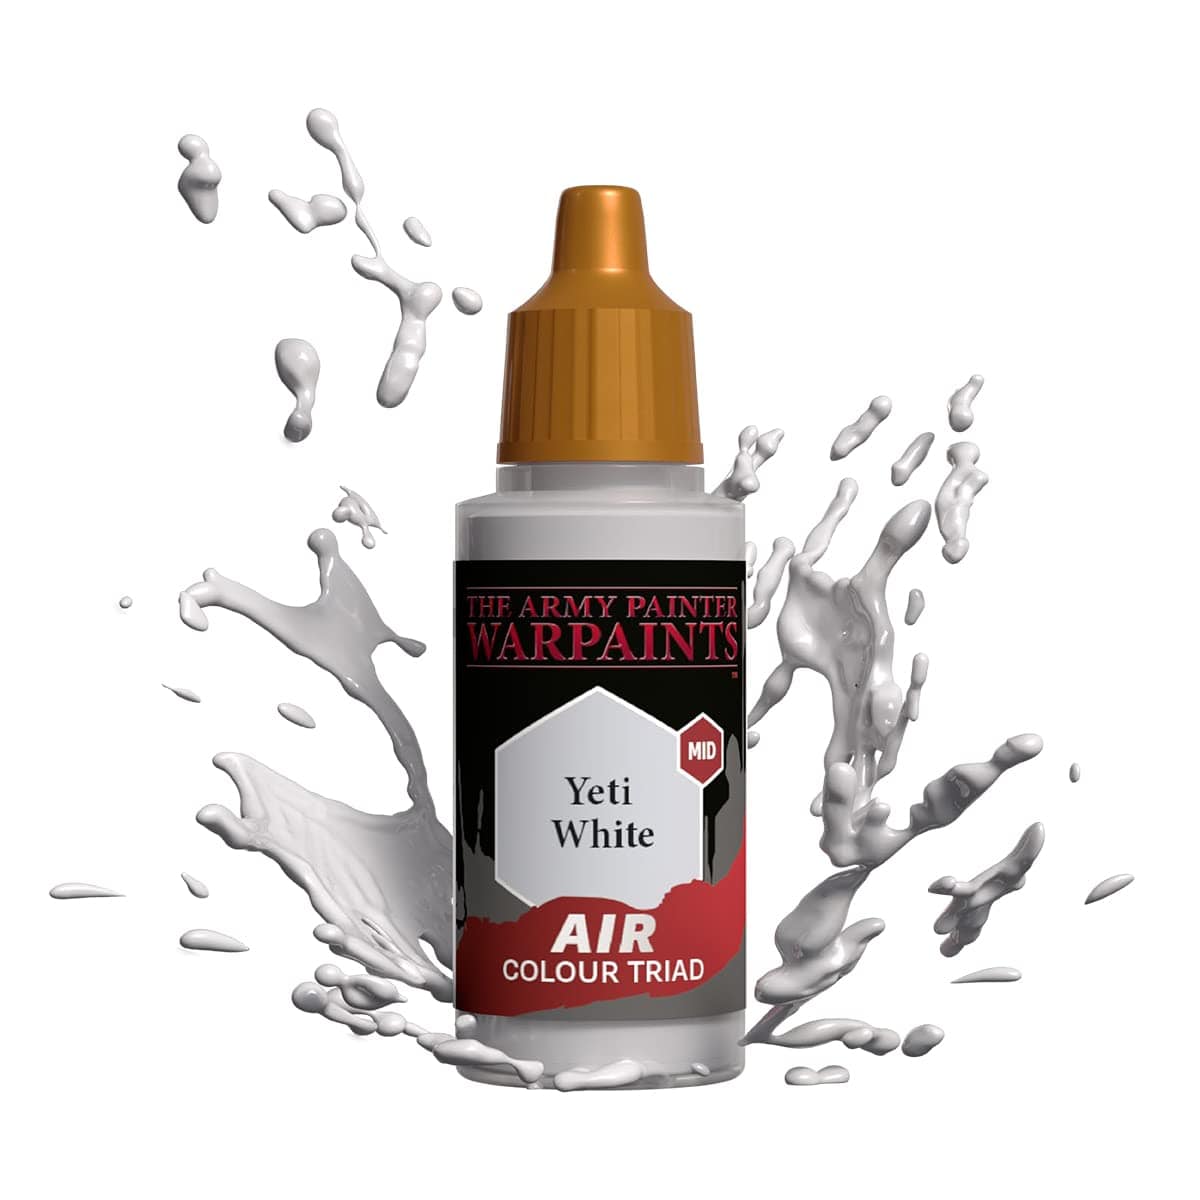 The Army Painter Accessories The Army Painter Warpaints Air: Yeti White 18ml